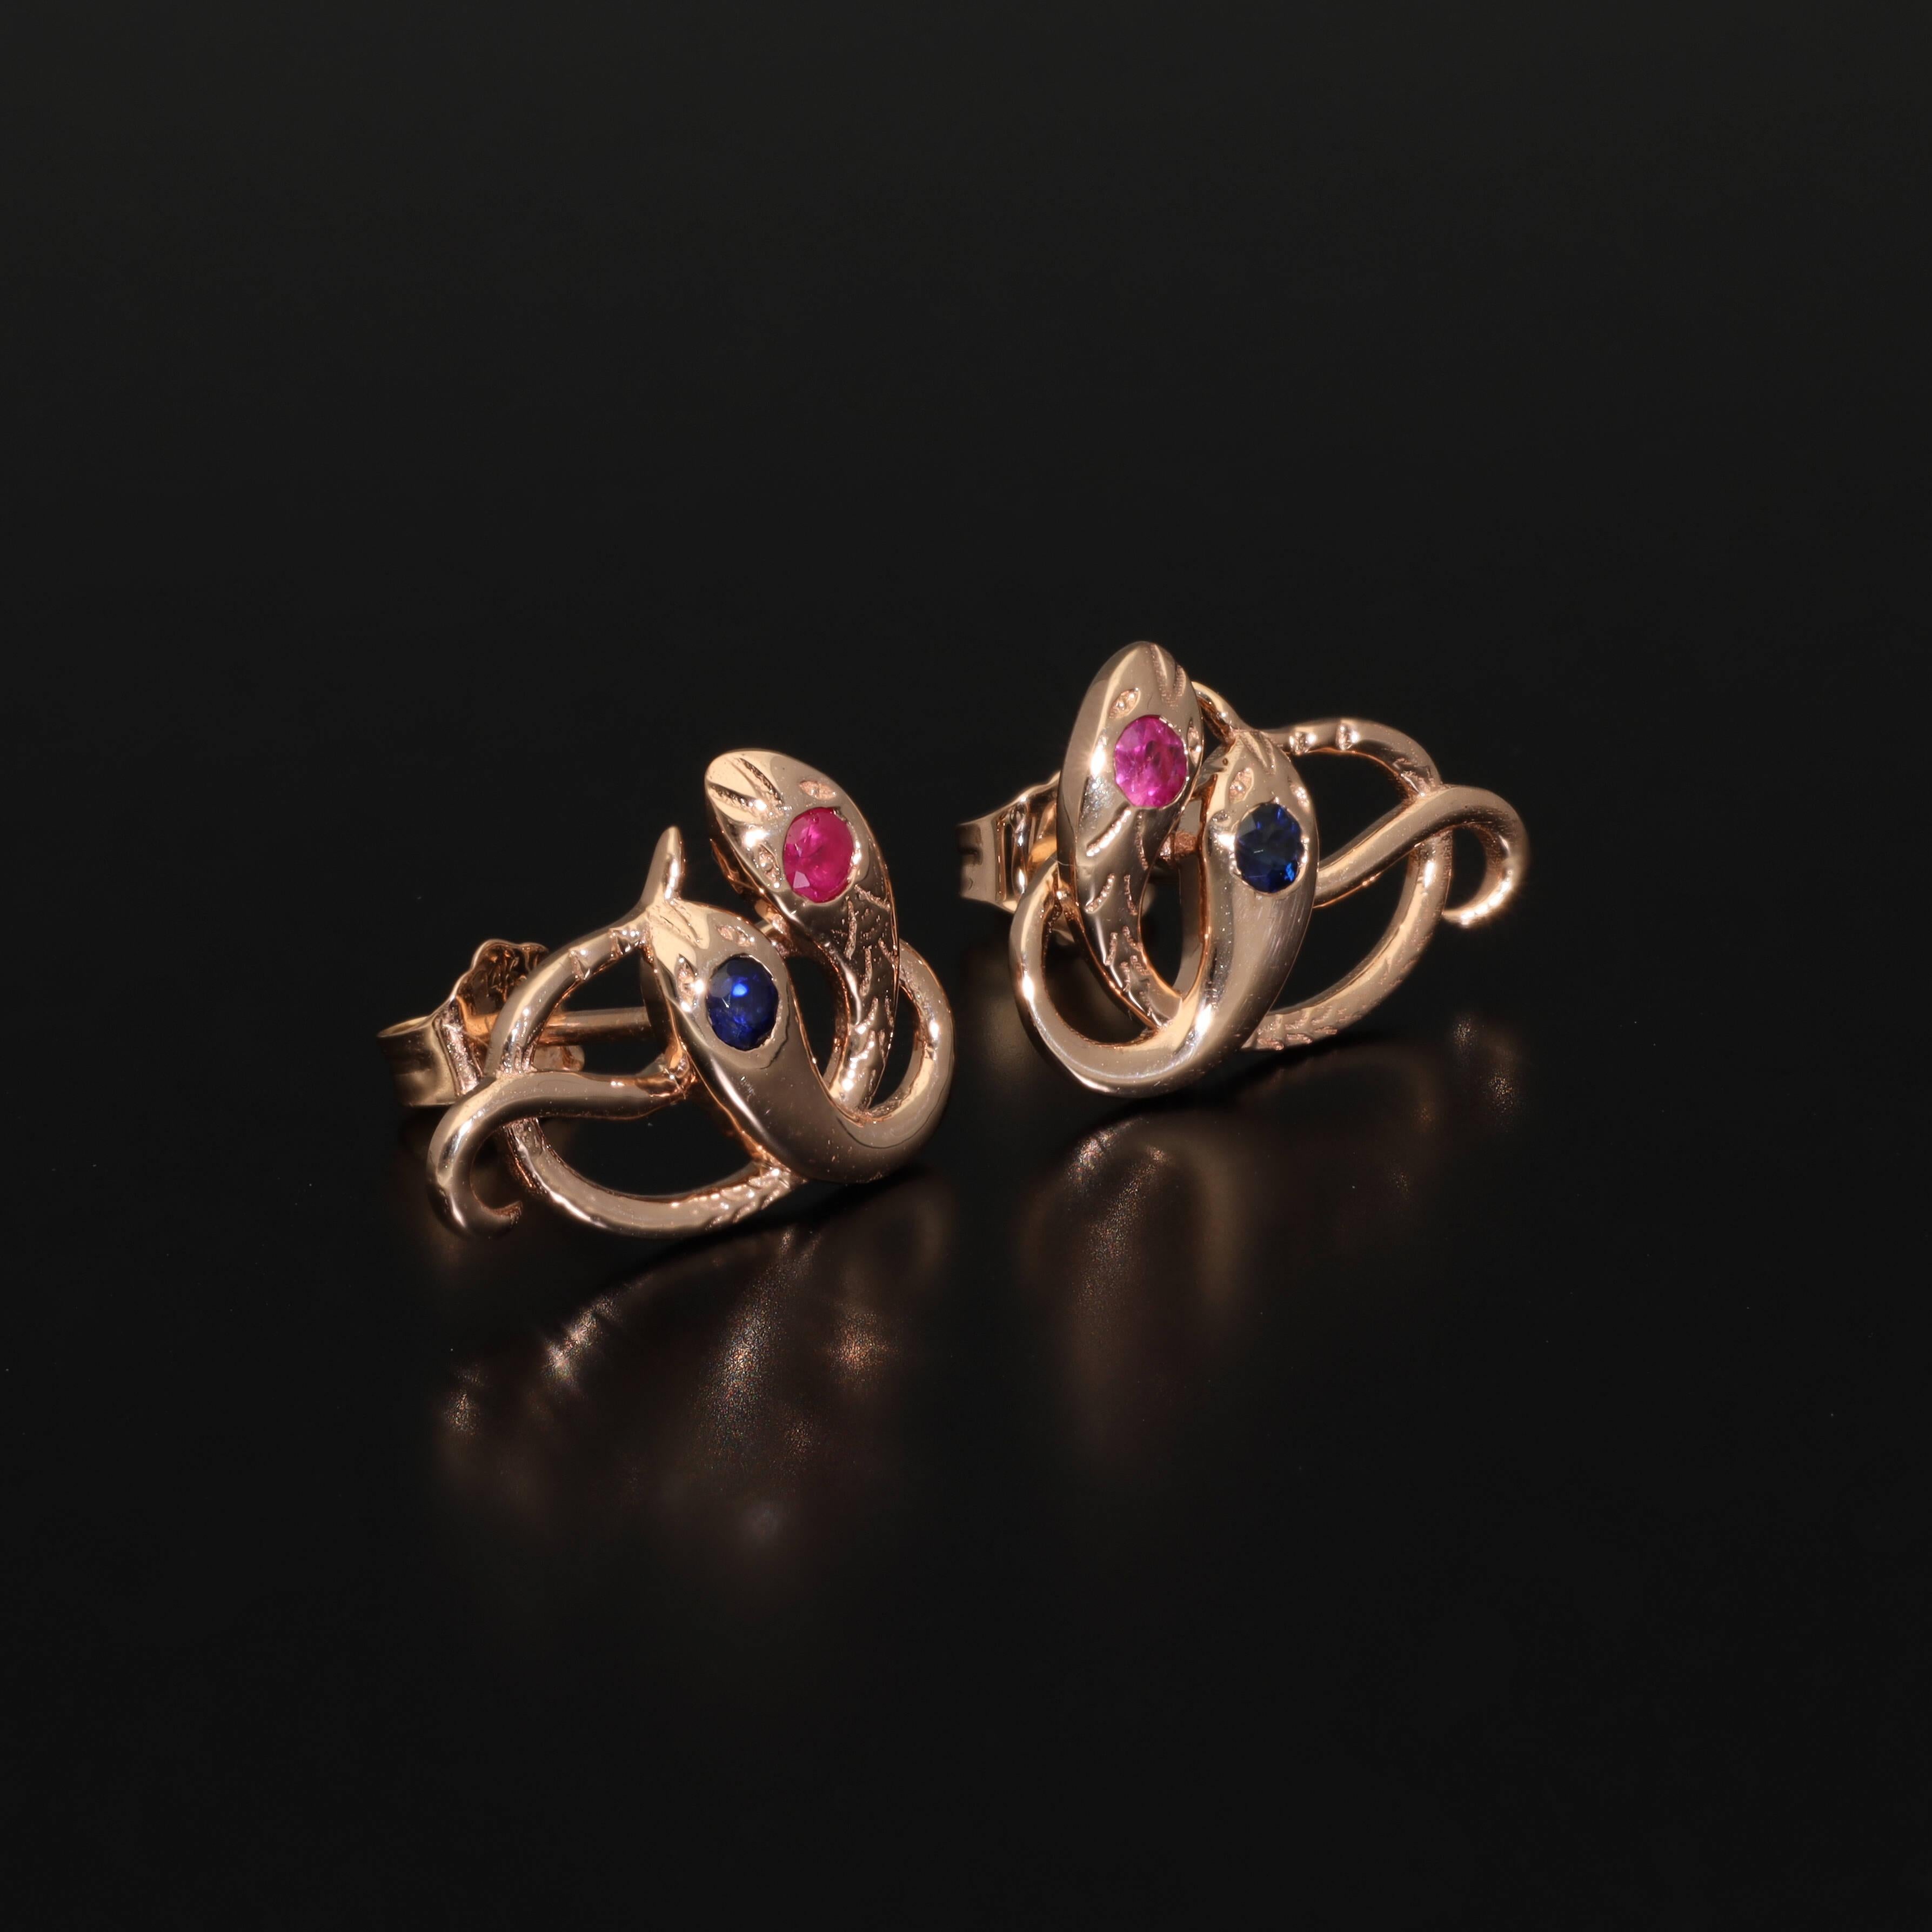 Antique Revival Gold Snake Stud Earrings, Ruby Sapphire Rose Gold Serpent Studs For Sale 3